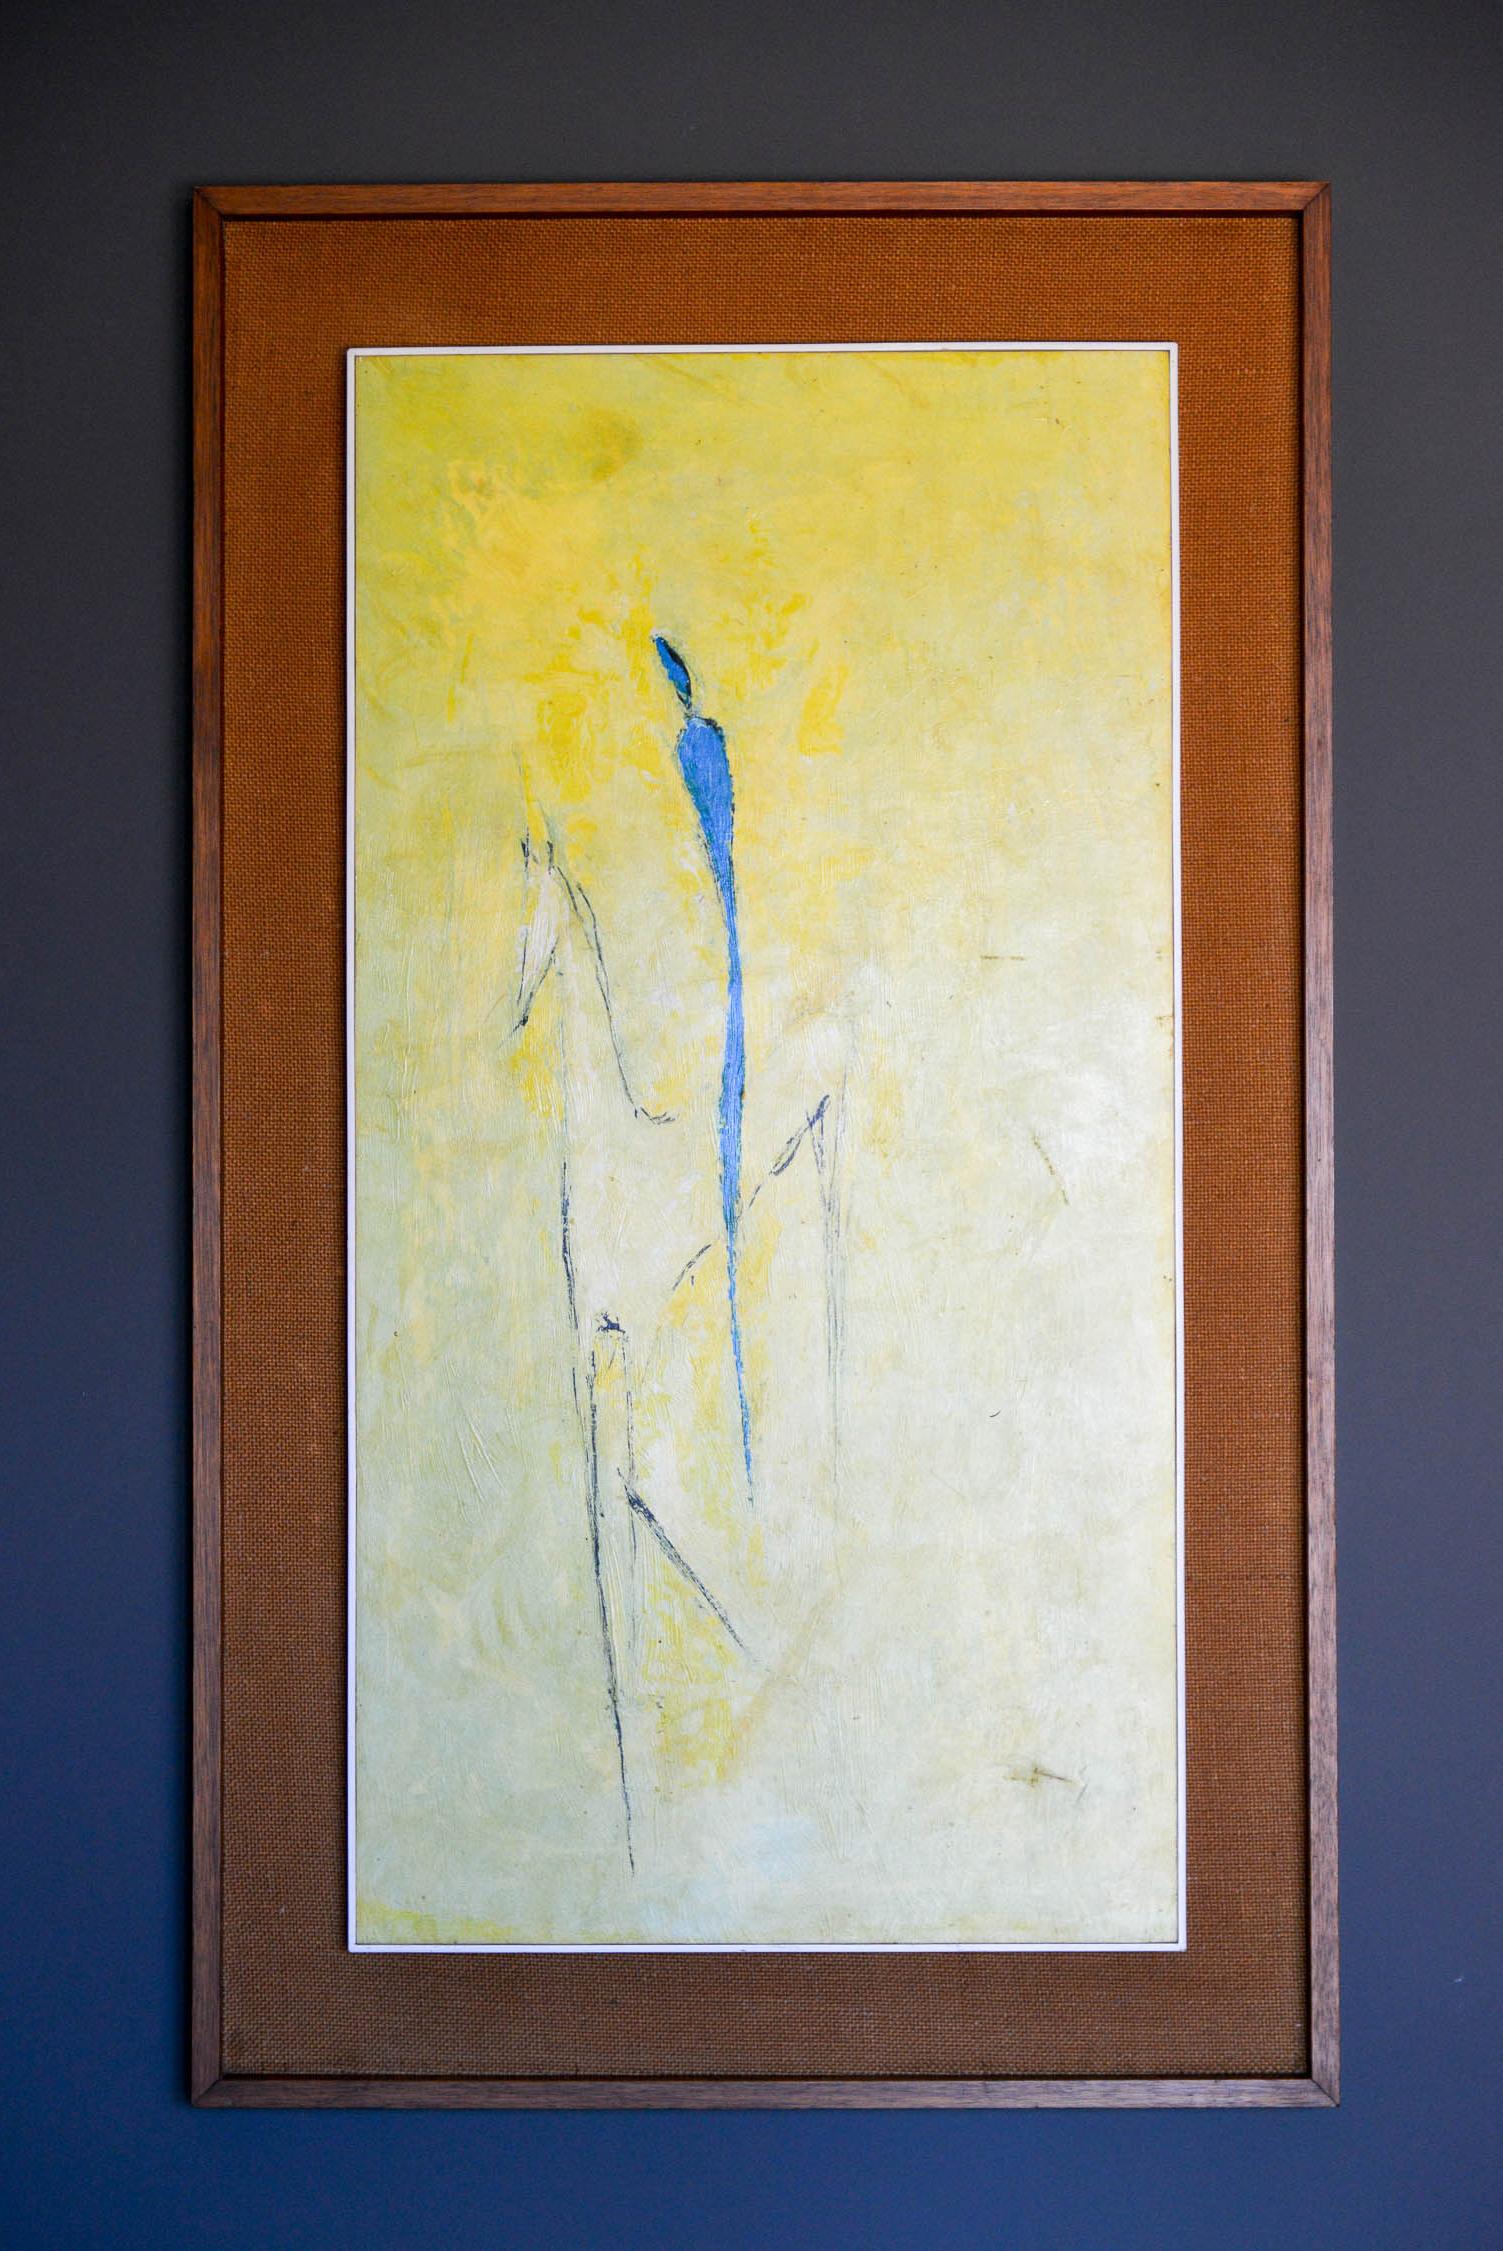 Vintage Spanish acrylic on Masonite painting, circa 1960. Beautiful color and subject matter of abstract figurative horse and rider. Original markings from Silvia Sennacheribbo Gallery in Barcelona circa 1960. Original framing in very good condition.